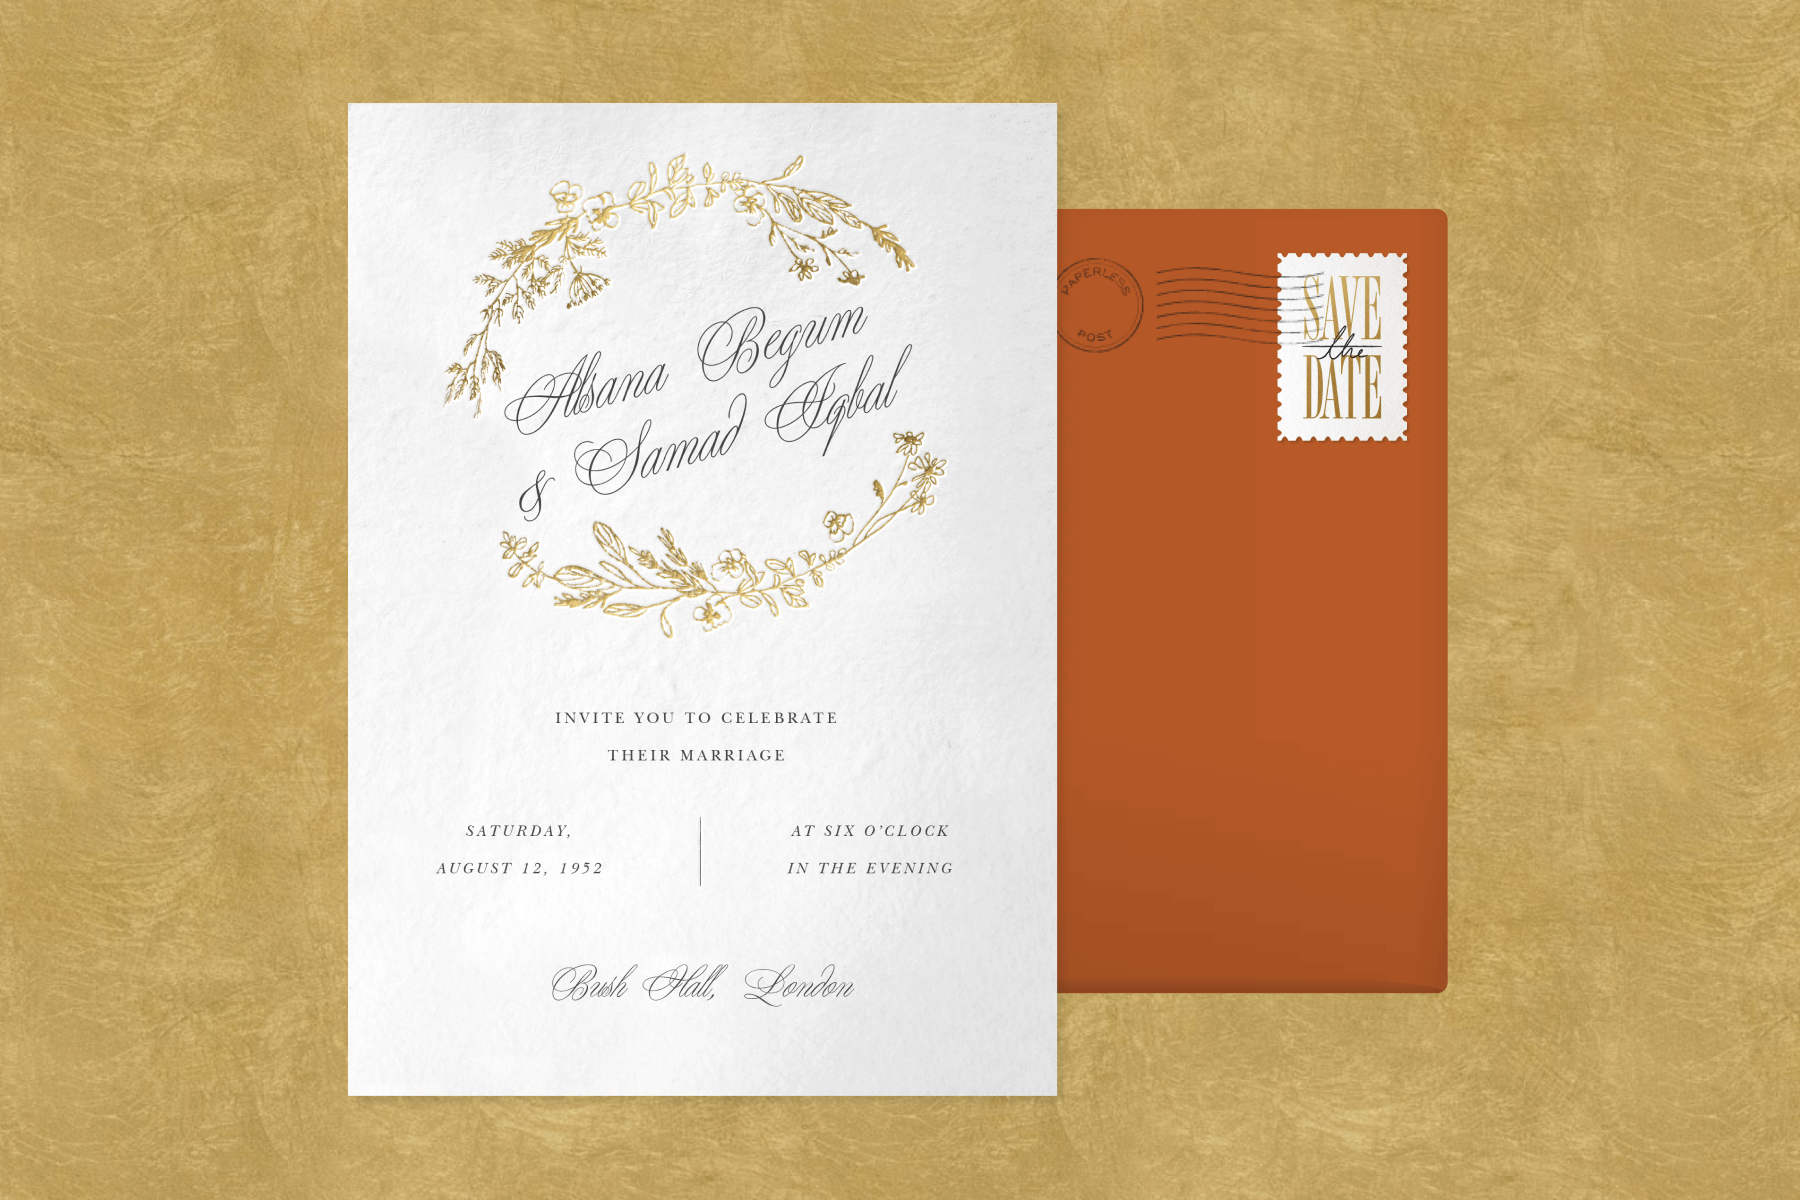 A white wedding invitation with gold sprigs circling the couple’s names written in script with an orange envelope and a stamp.